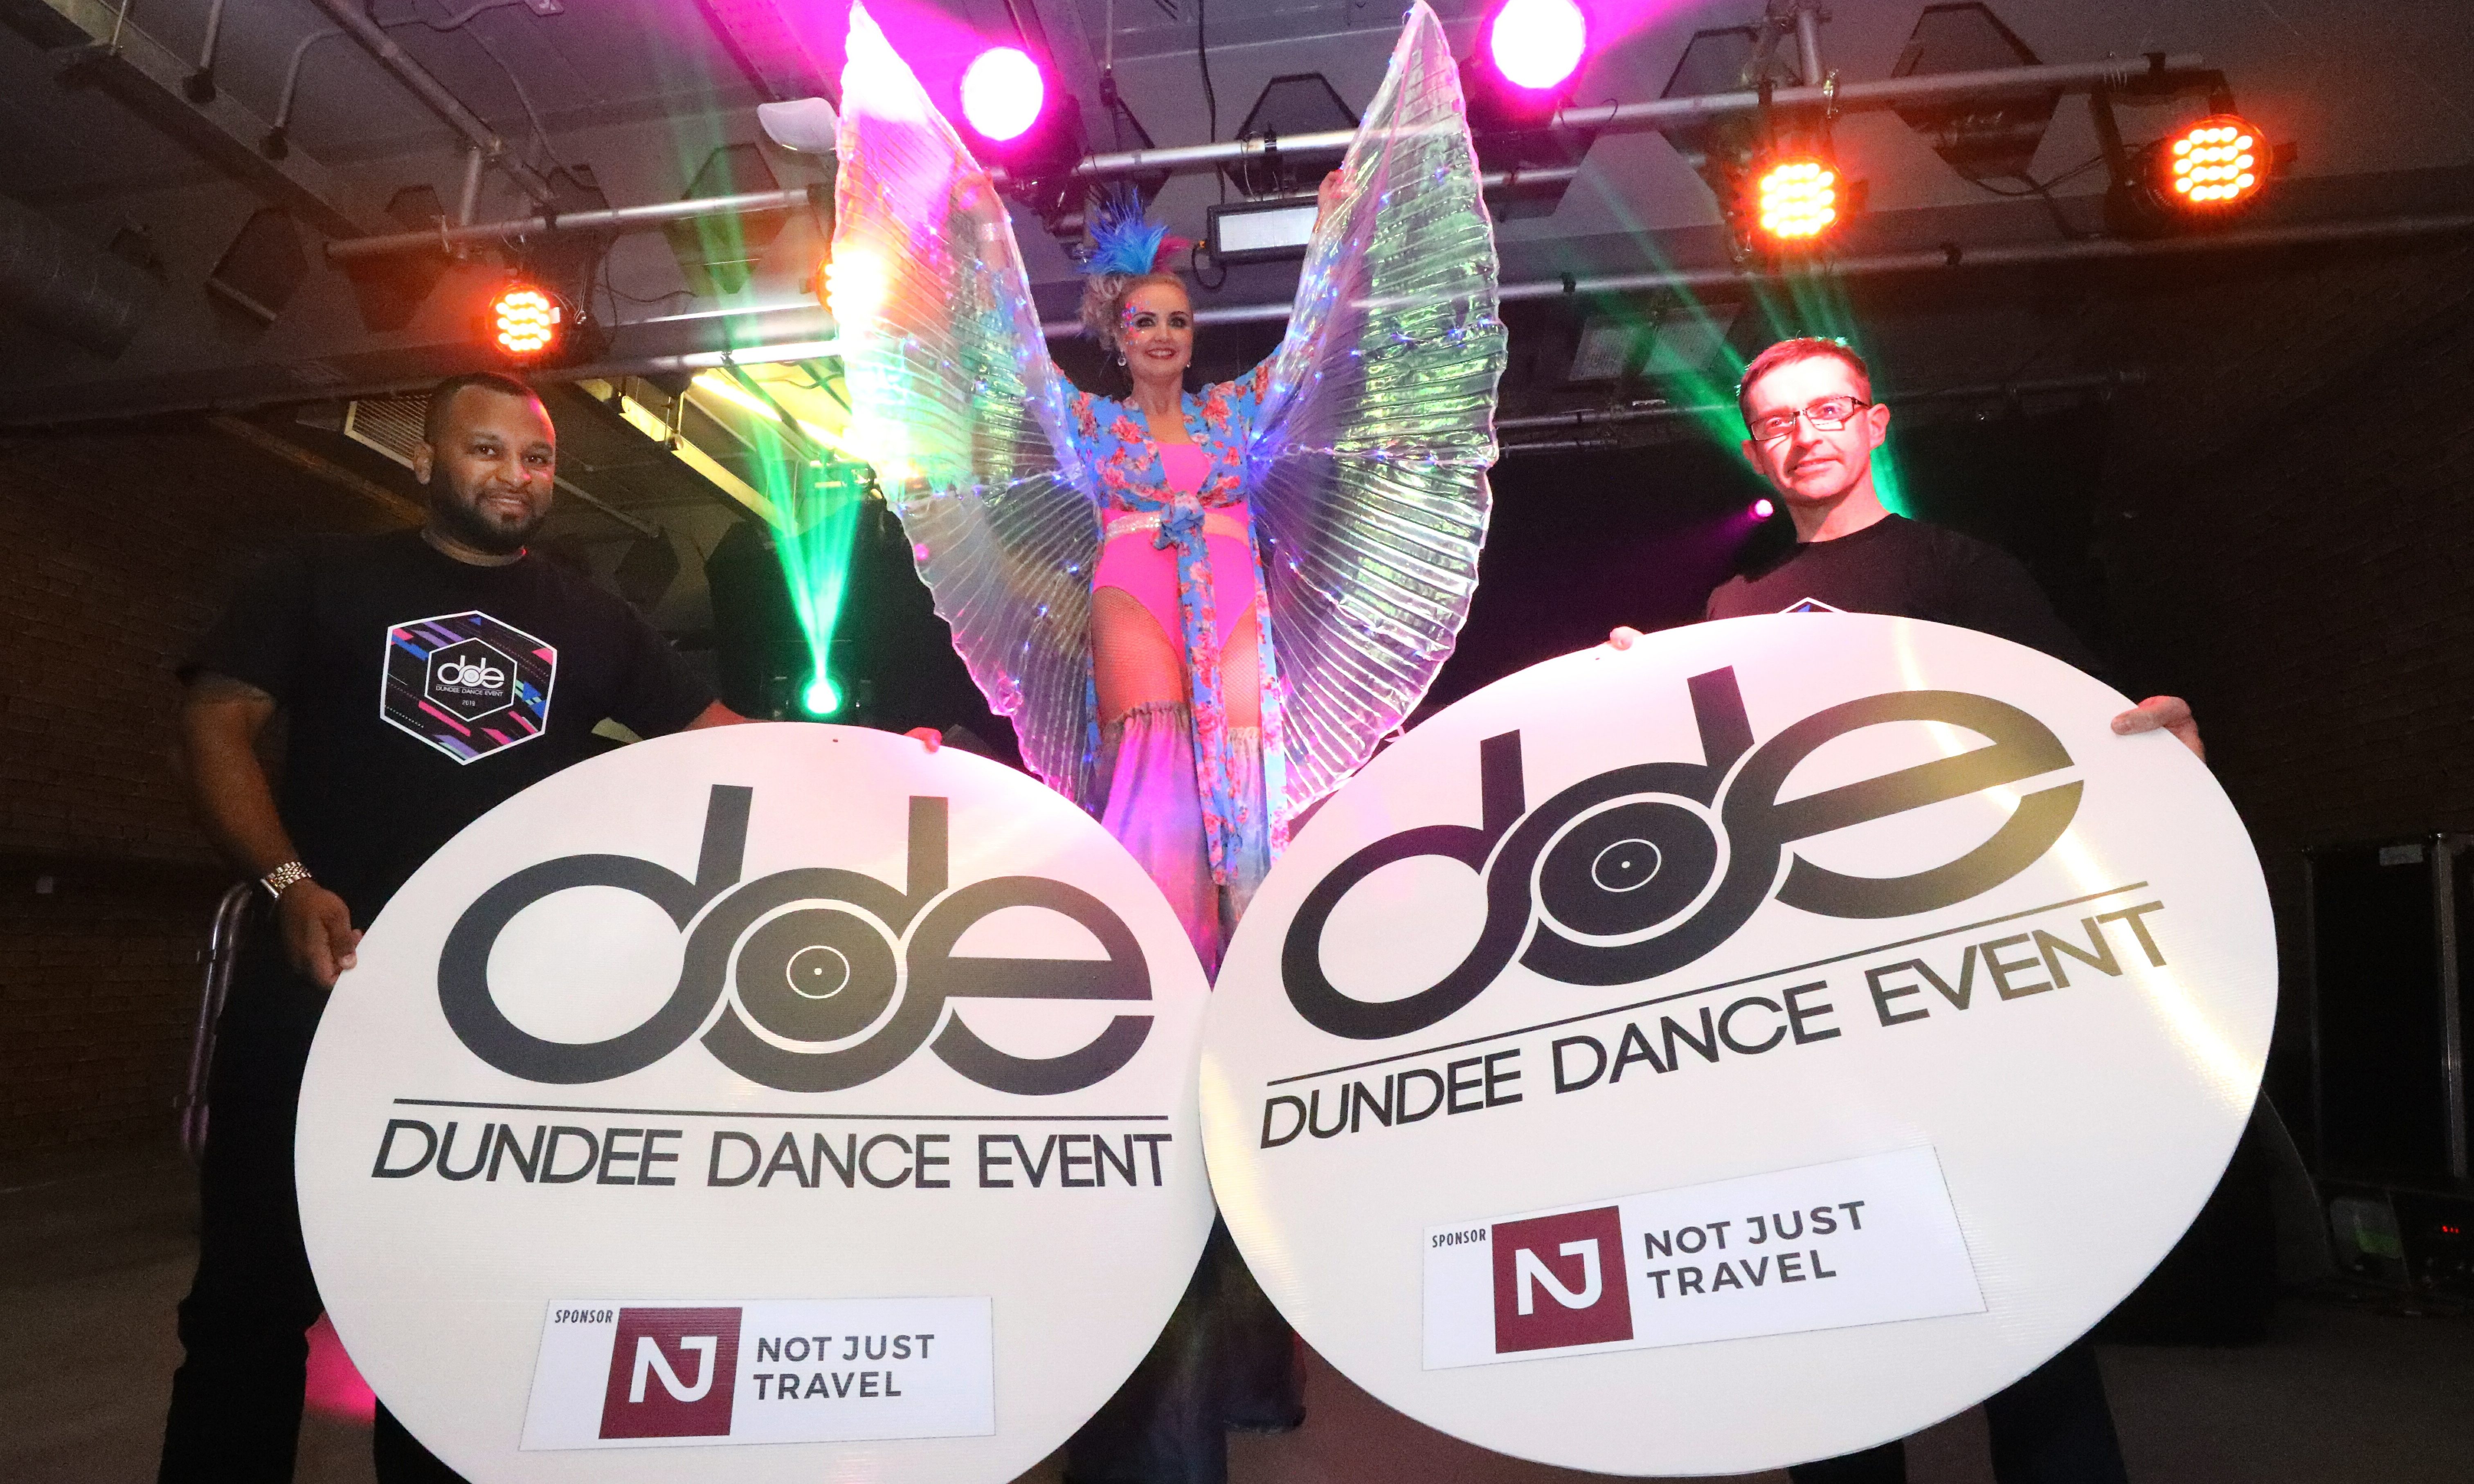 Richard Martin, left, and Mike McDonald, with Verity Power at DUSA, to launch the Dundee Dance Event 2019.